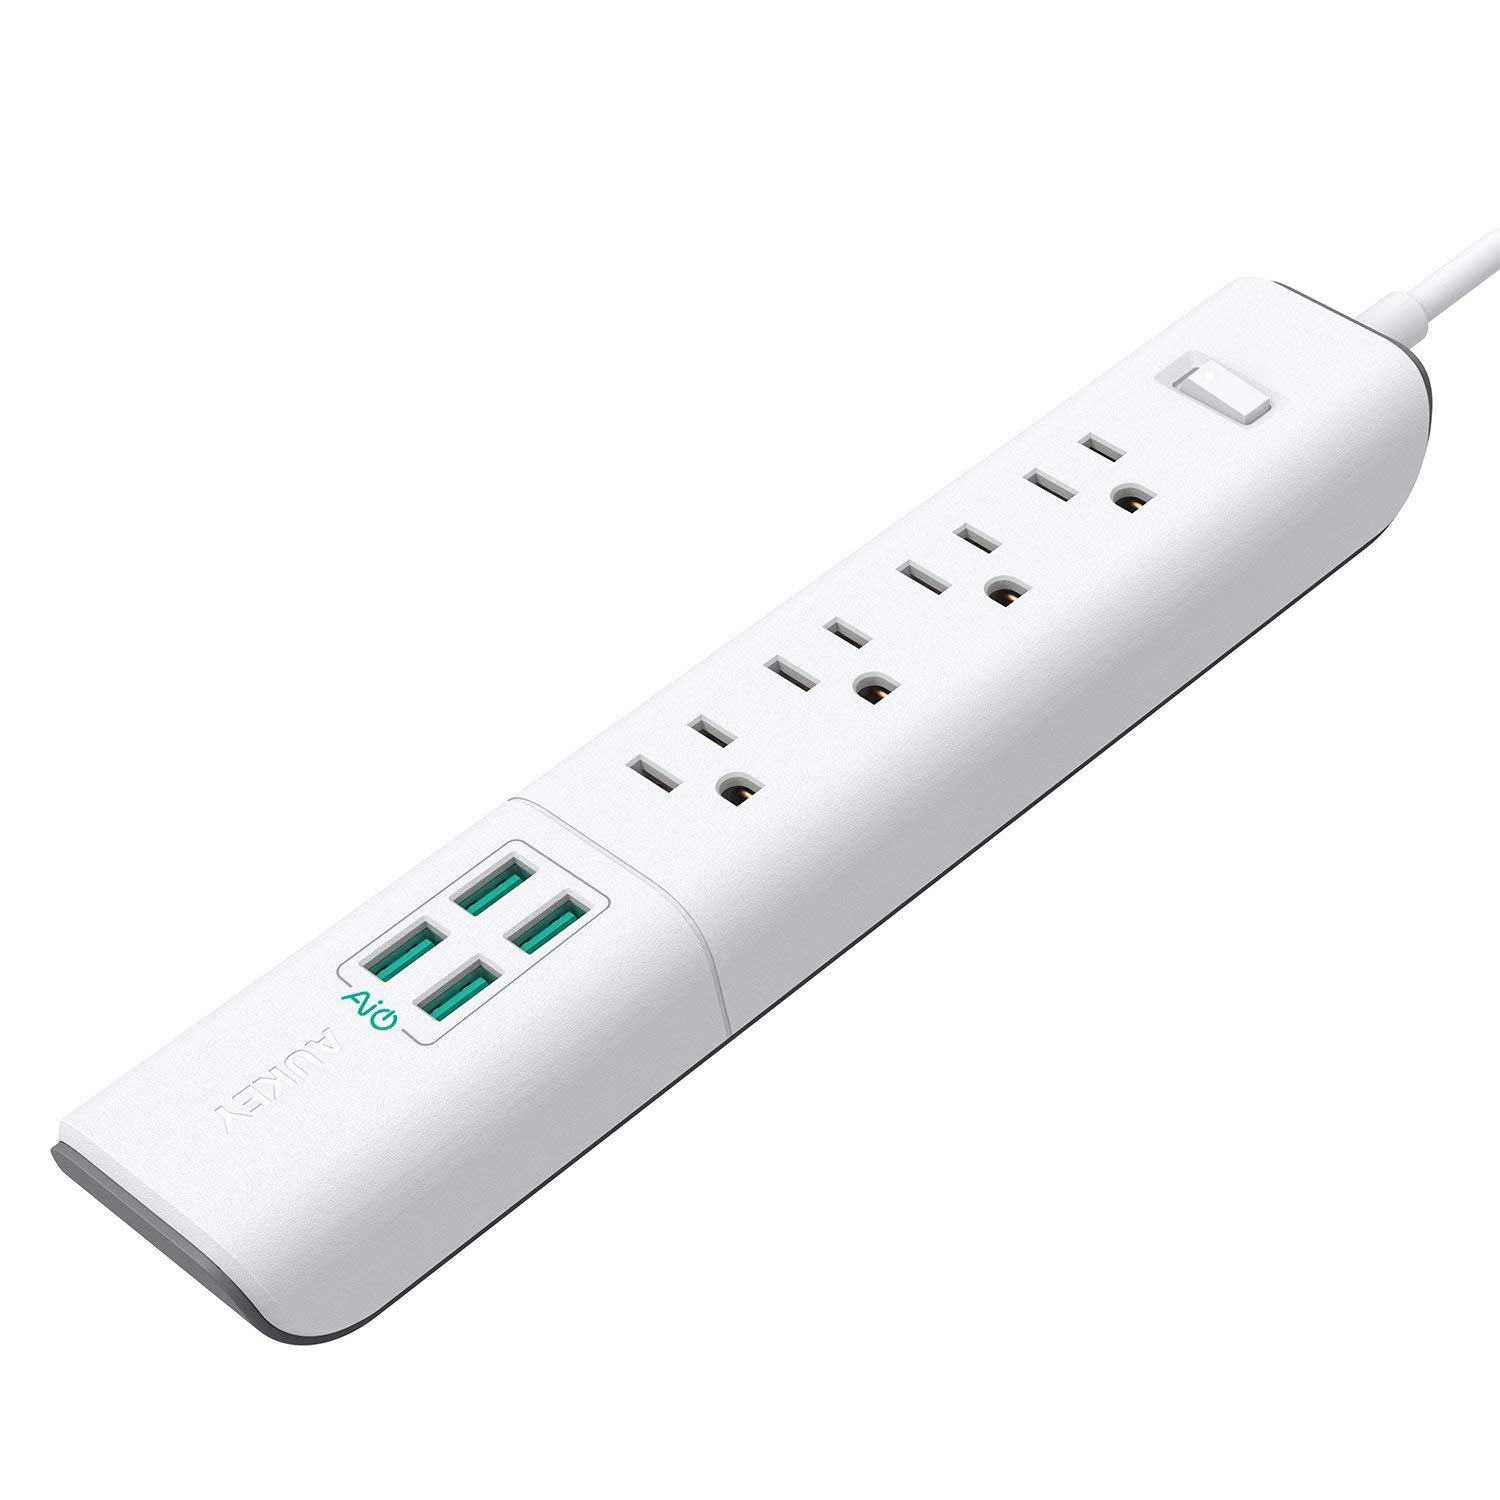 AUKEY Power Strip with 4 USB Ports and 4 Outlets & 5ft Power Cord for Smartphone, Laptop, Tablet, Lamp and More - White by AUKEY - Saamaan.Pk